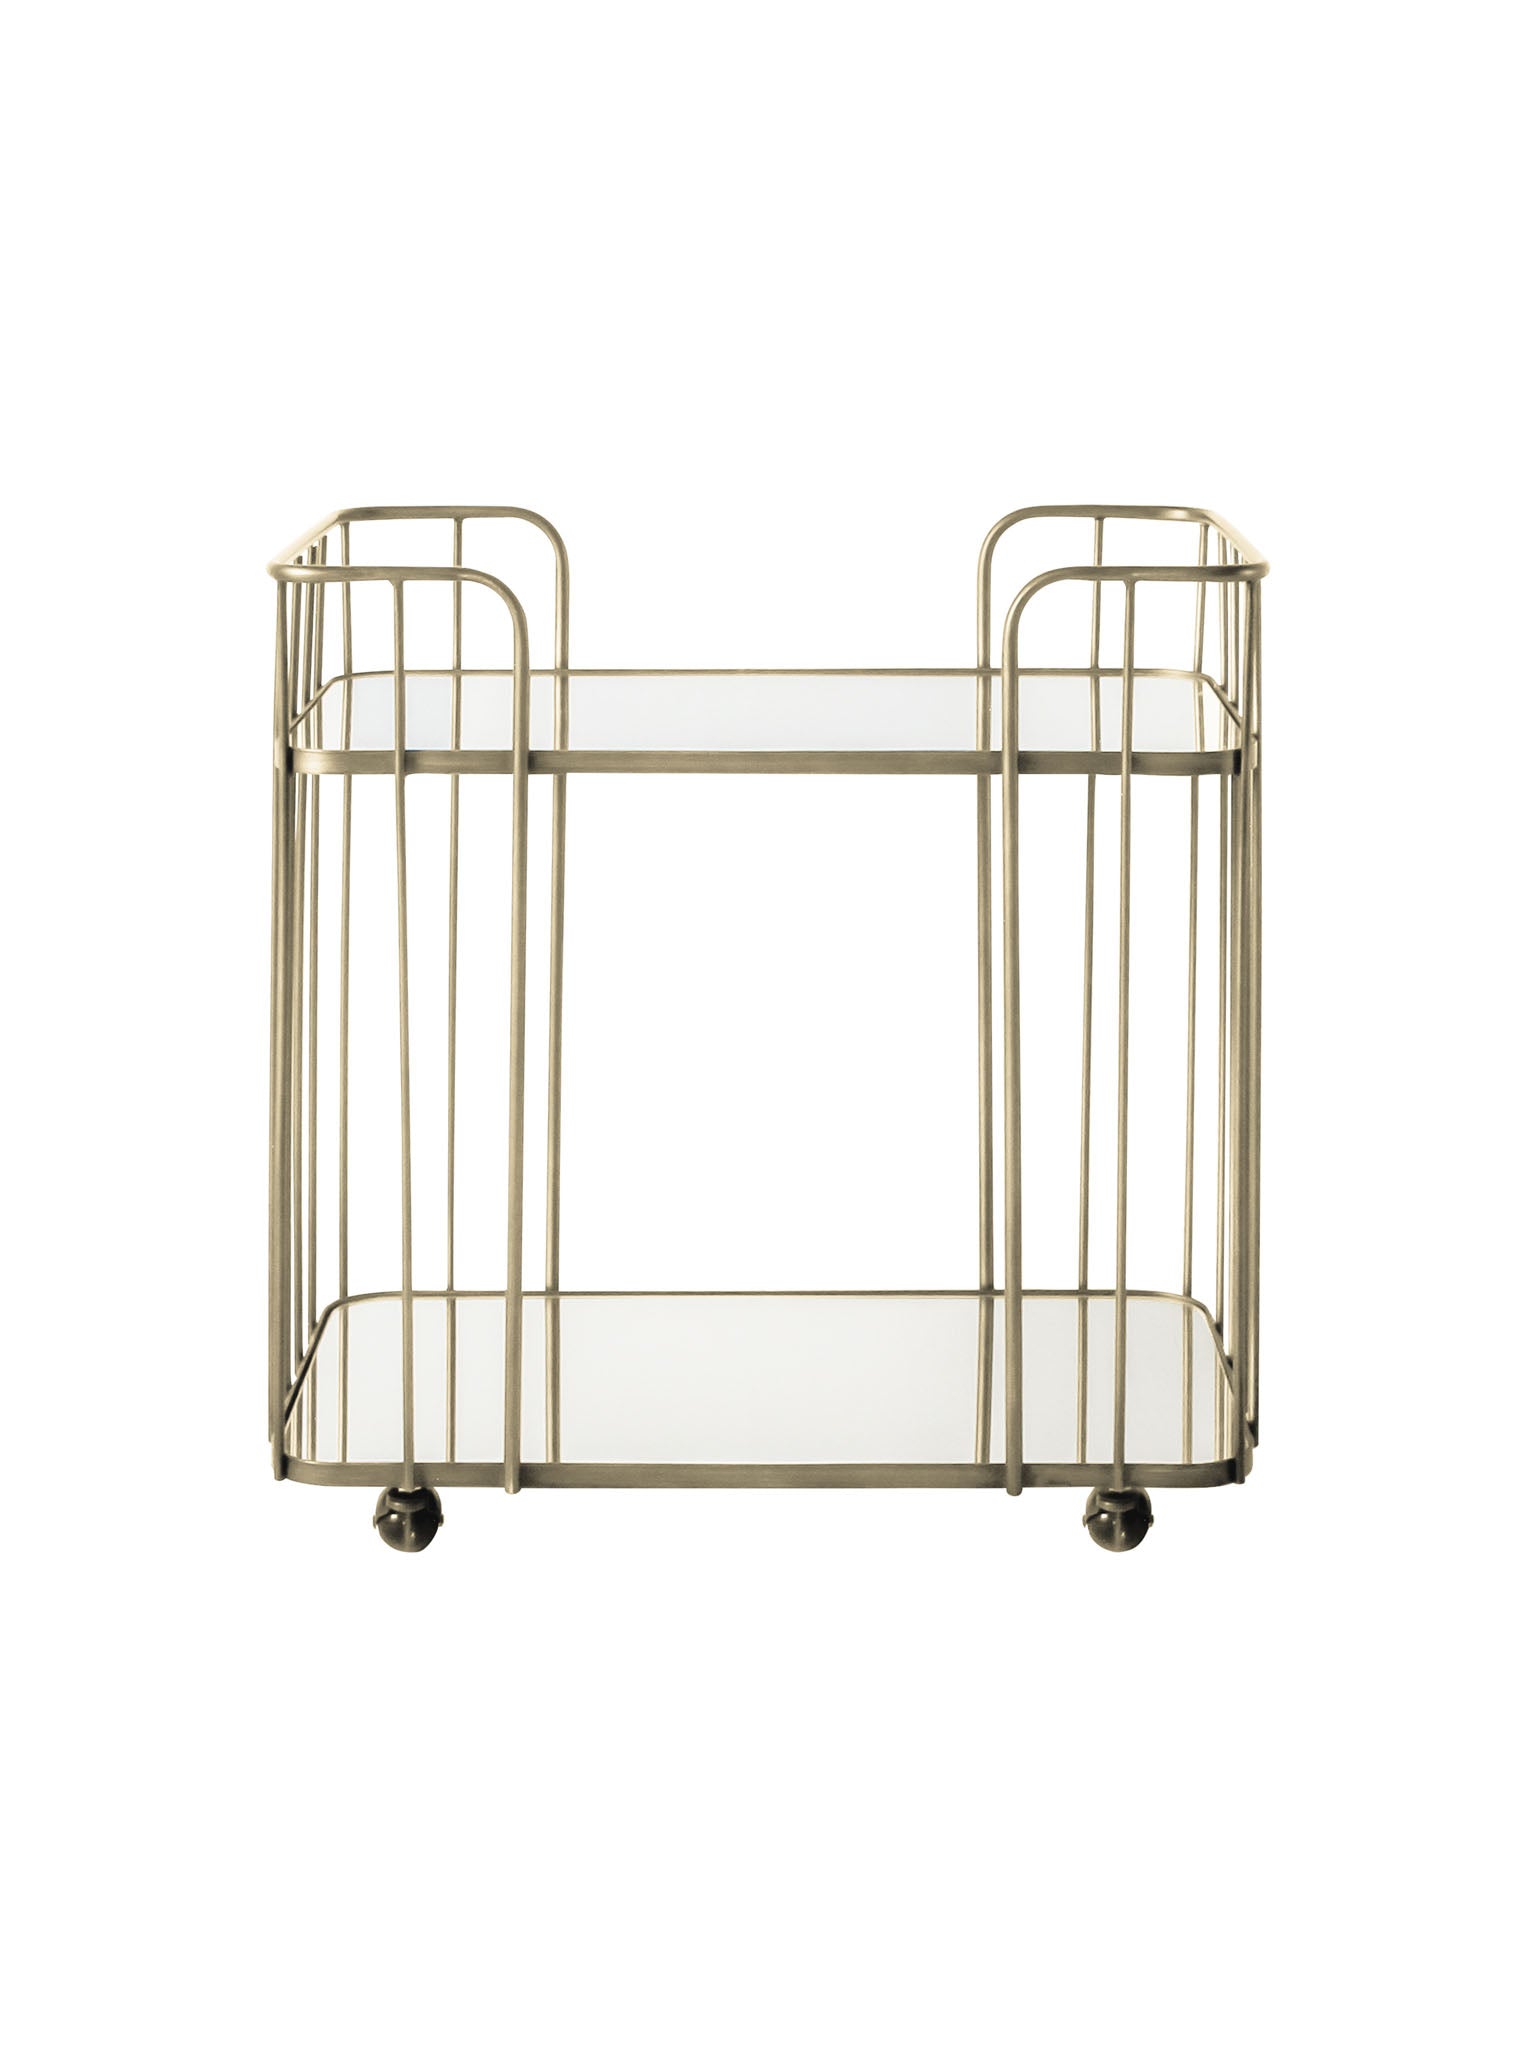 Art Deco Style Metal Drinks Trolley on castors in Champagne and Bronze